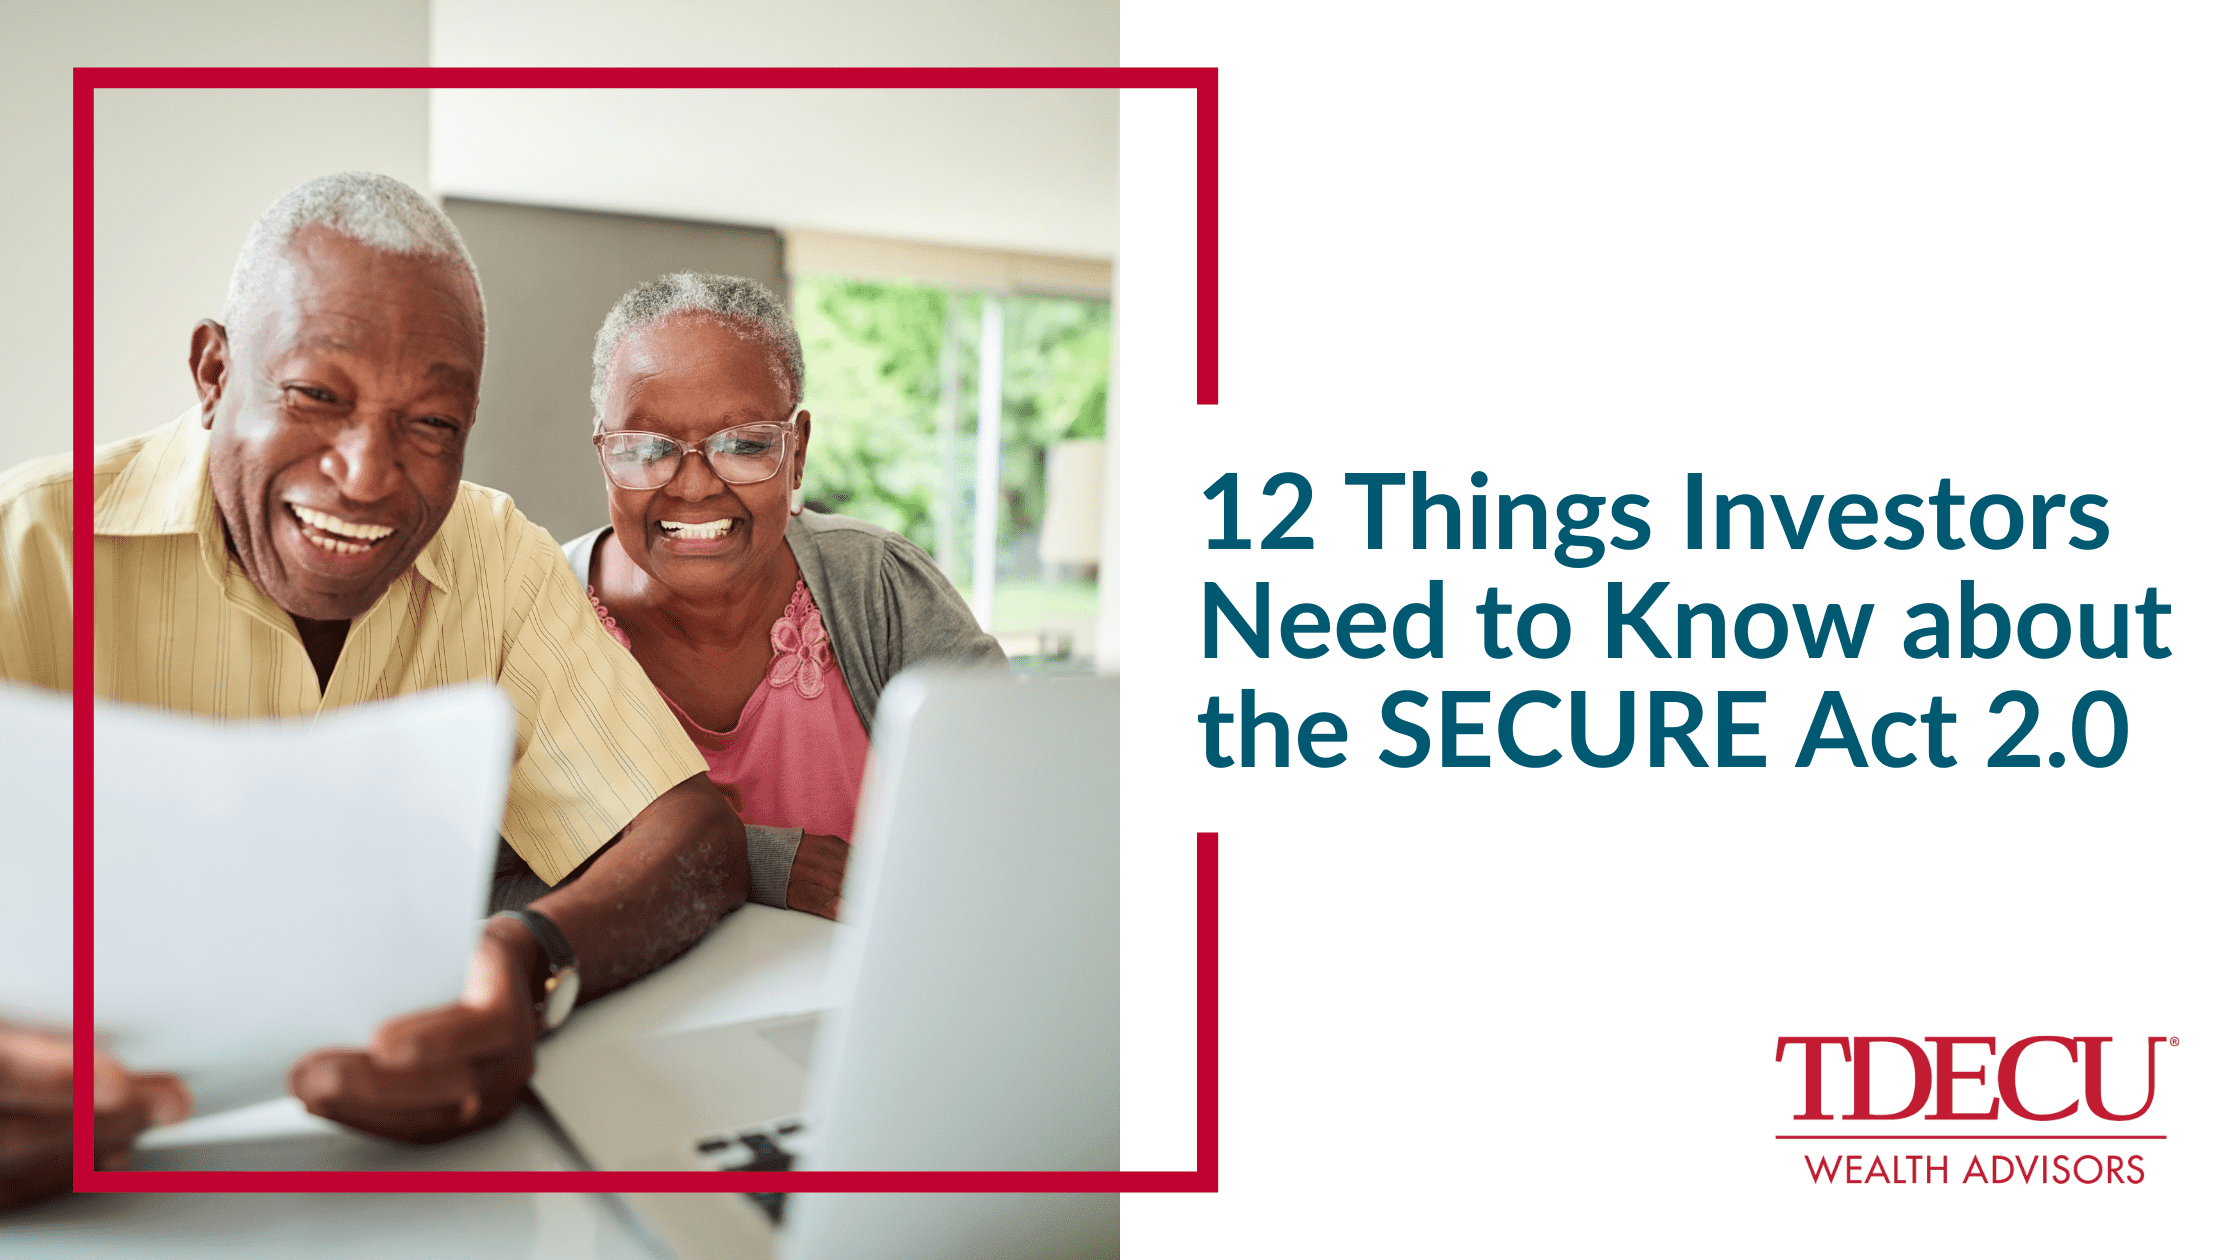 12 Things Investors Need to Know about the SECURE Act 2.0